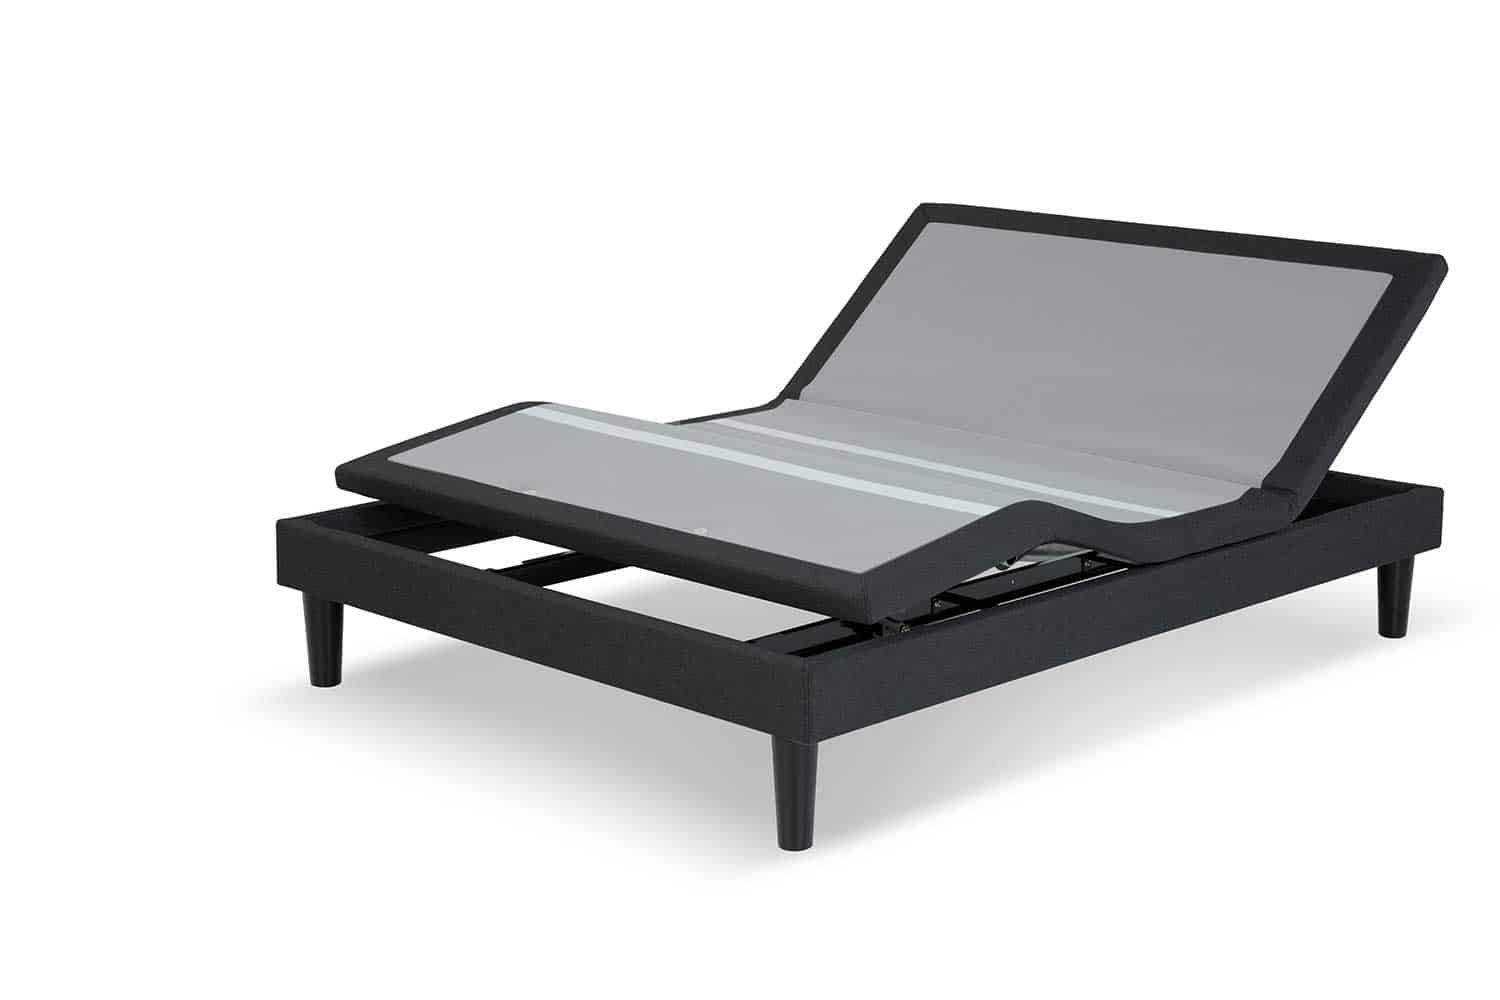 Amazing features of the adjustable beds